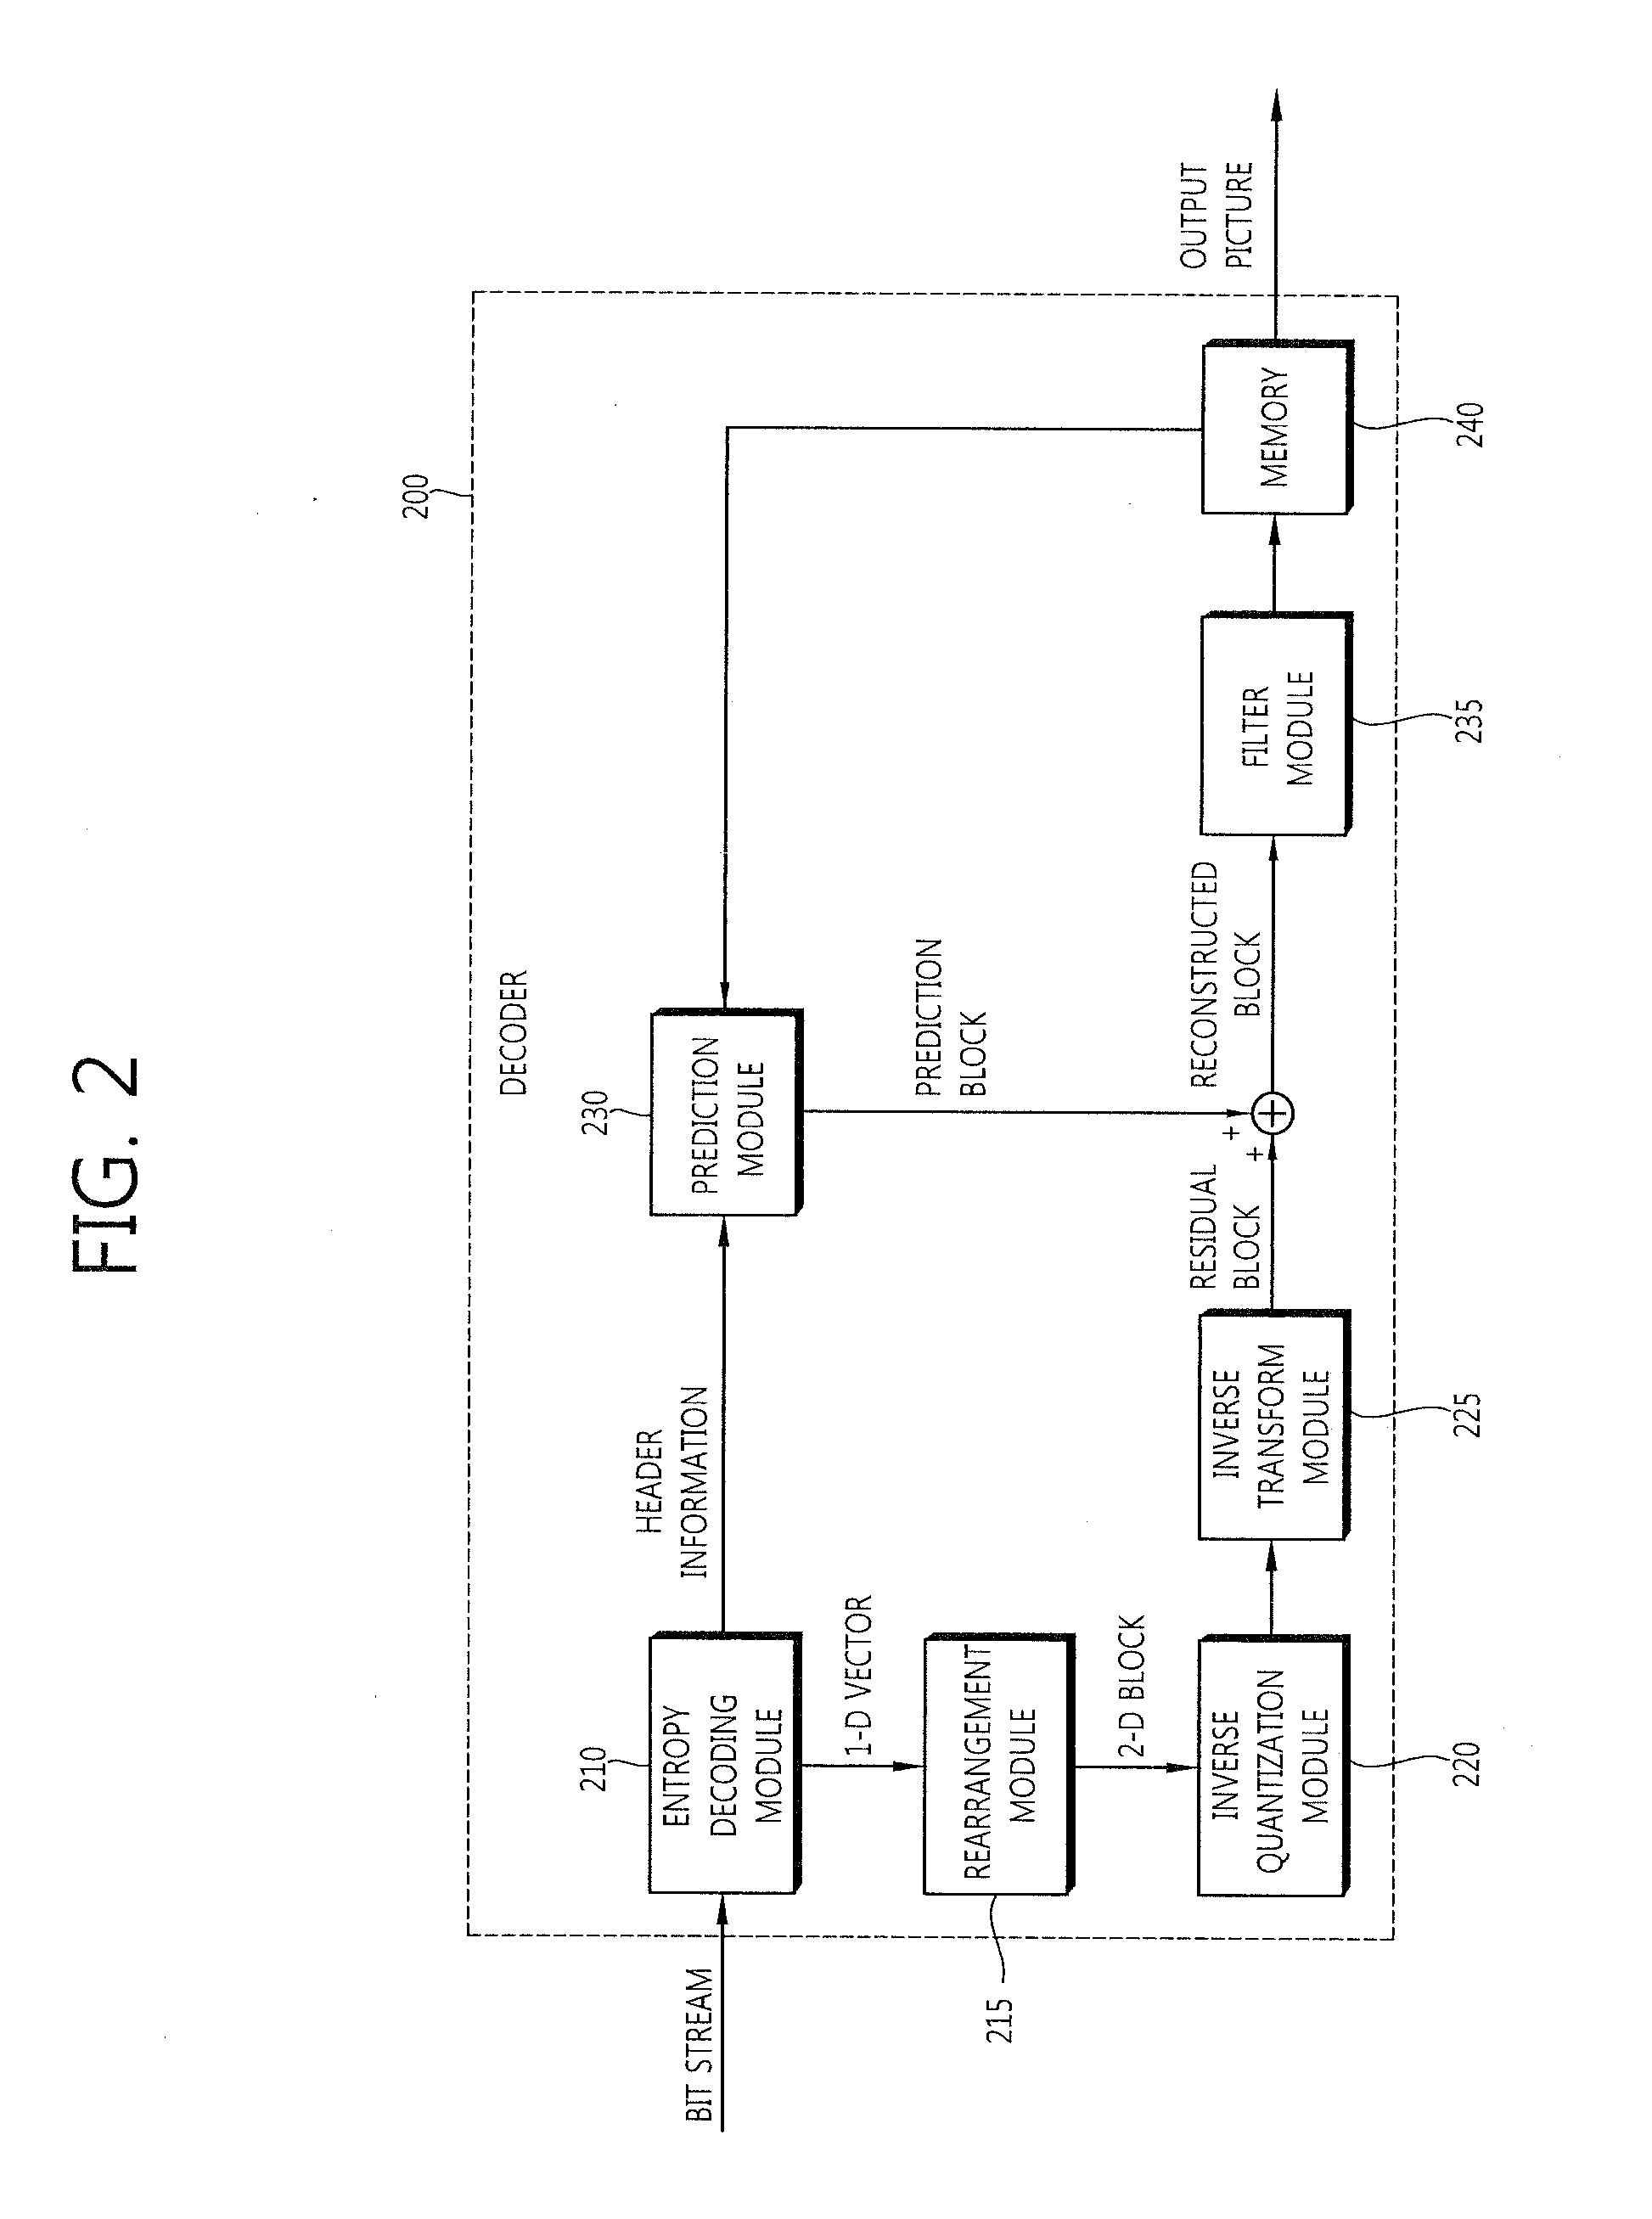 Method for encoding and decoding image information and device using same